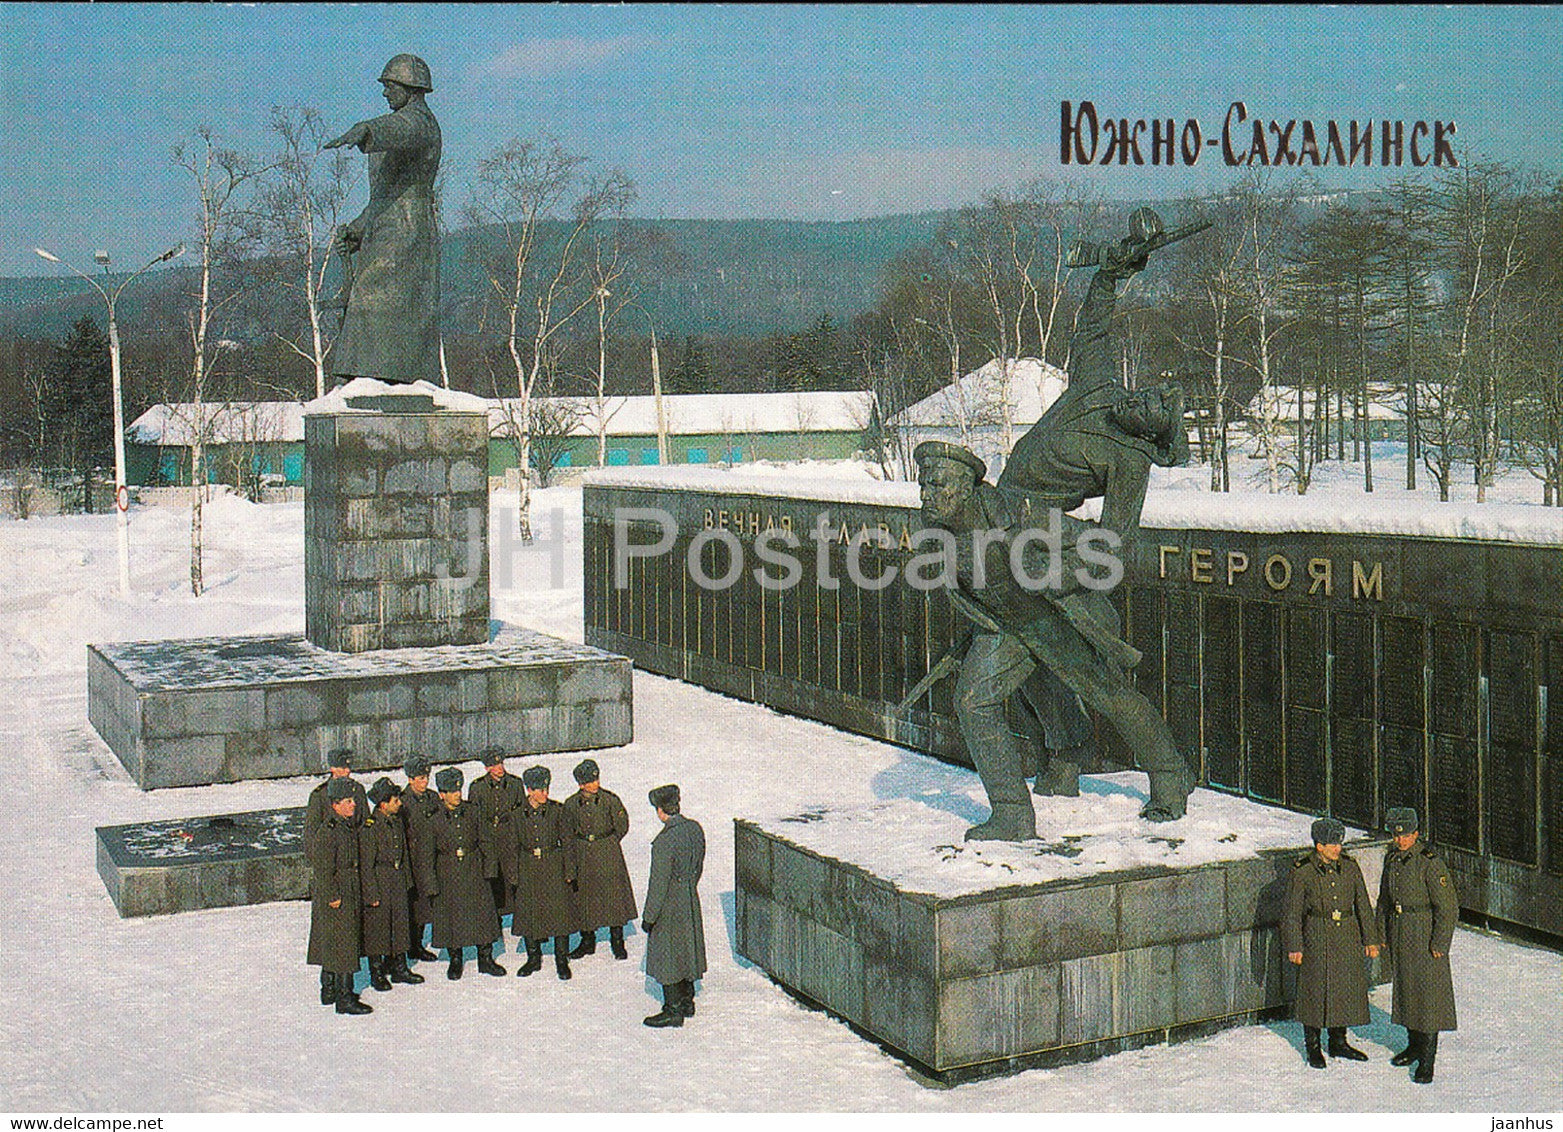 Yuzhno-Sakhalinsk - Memorial to Soviet Soldiers who died in combats in Sakhalin - 1990 - Russia USSR - unused - JH Postcards